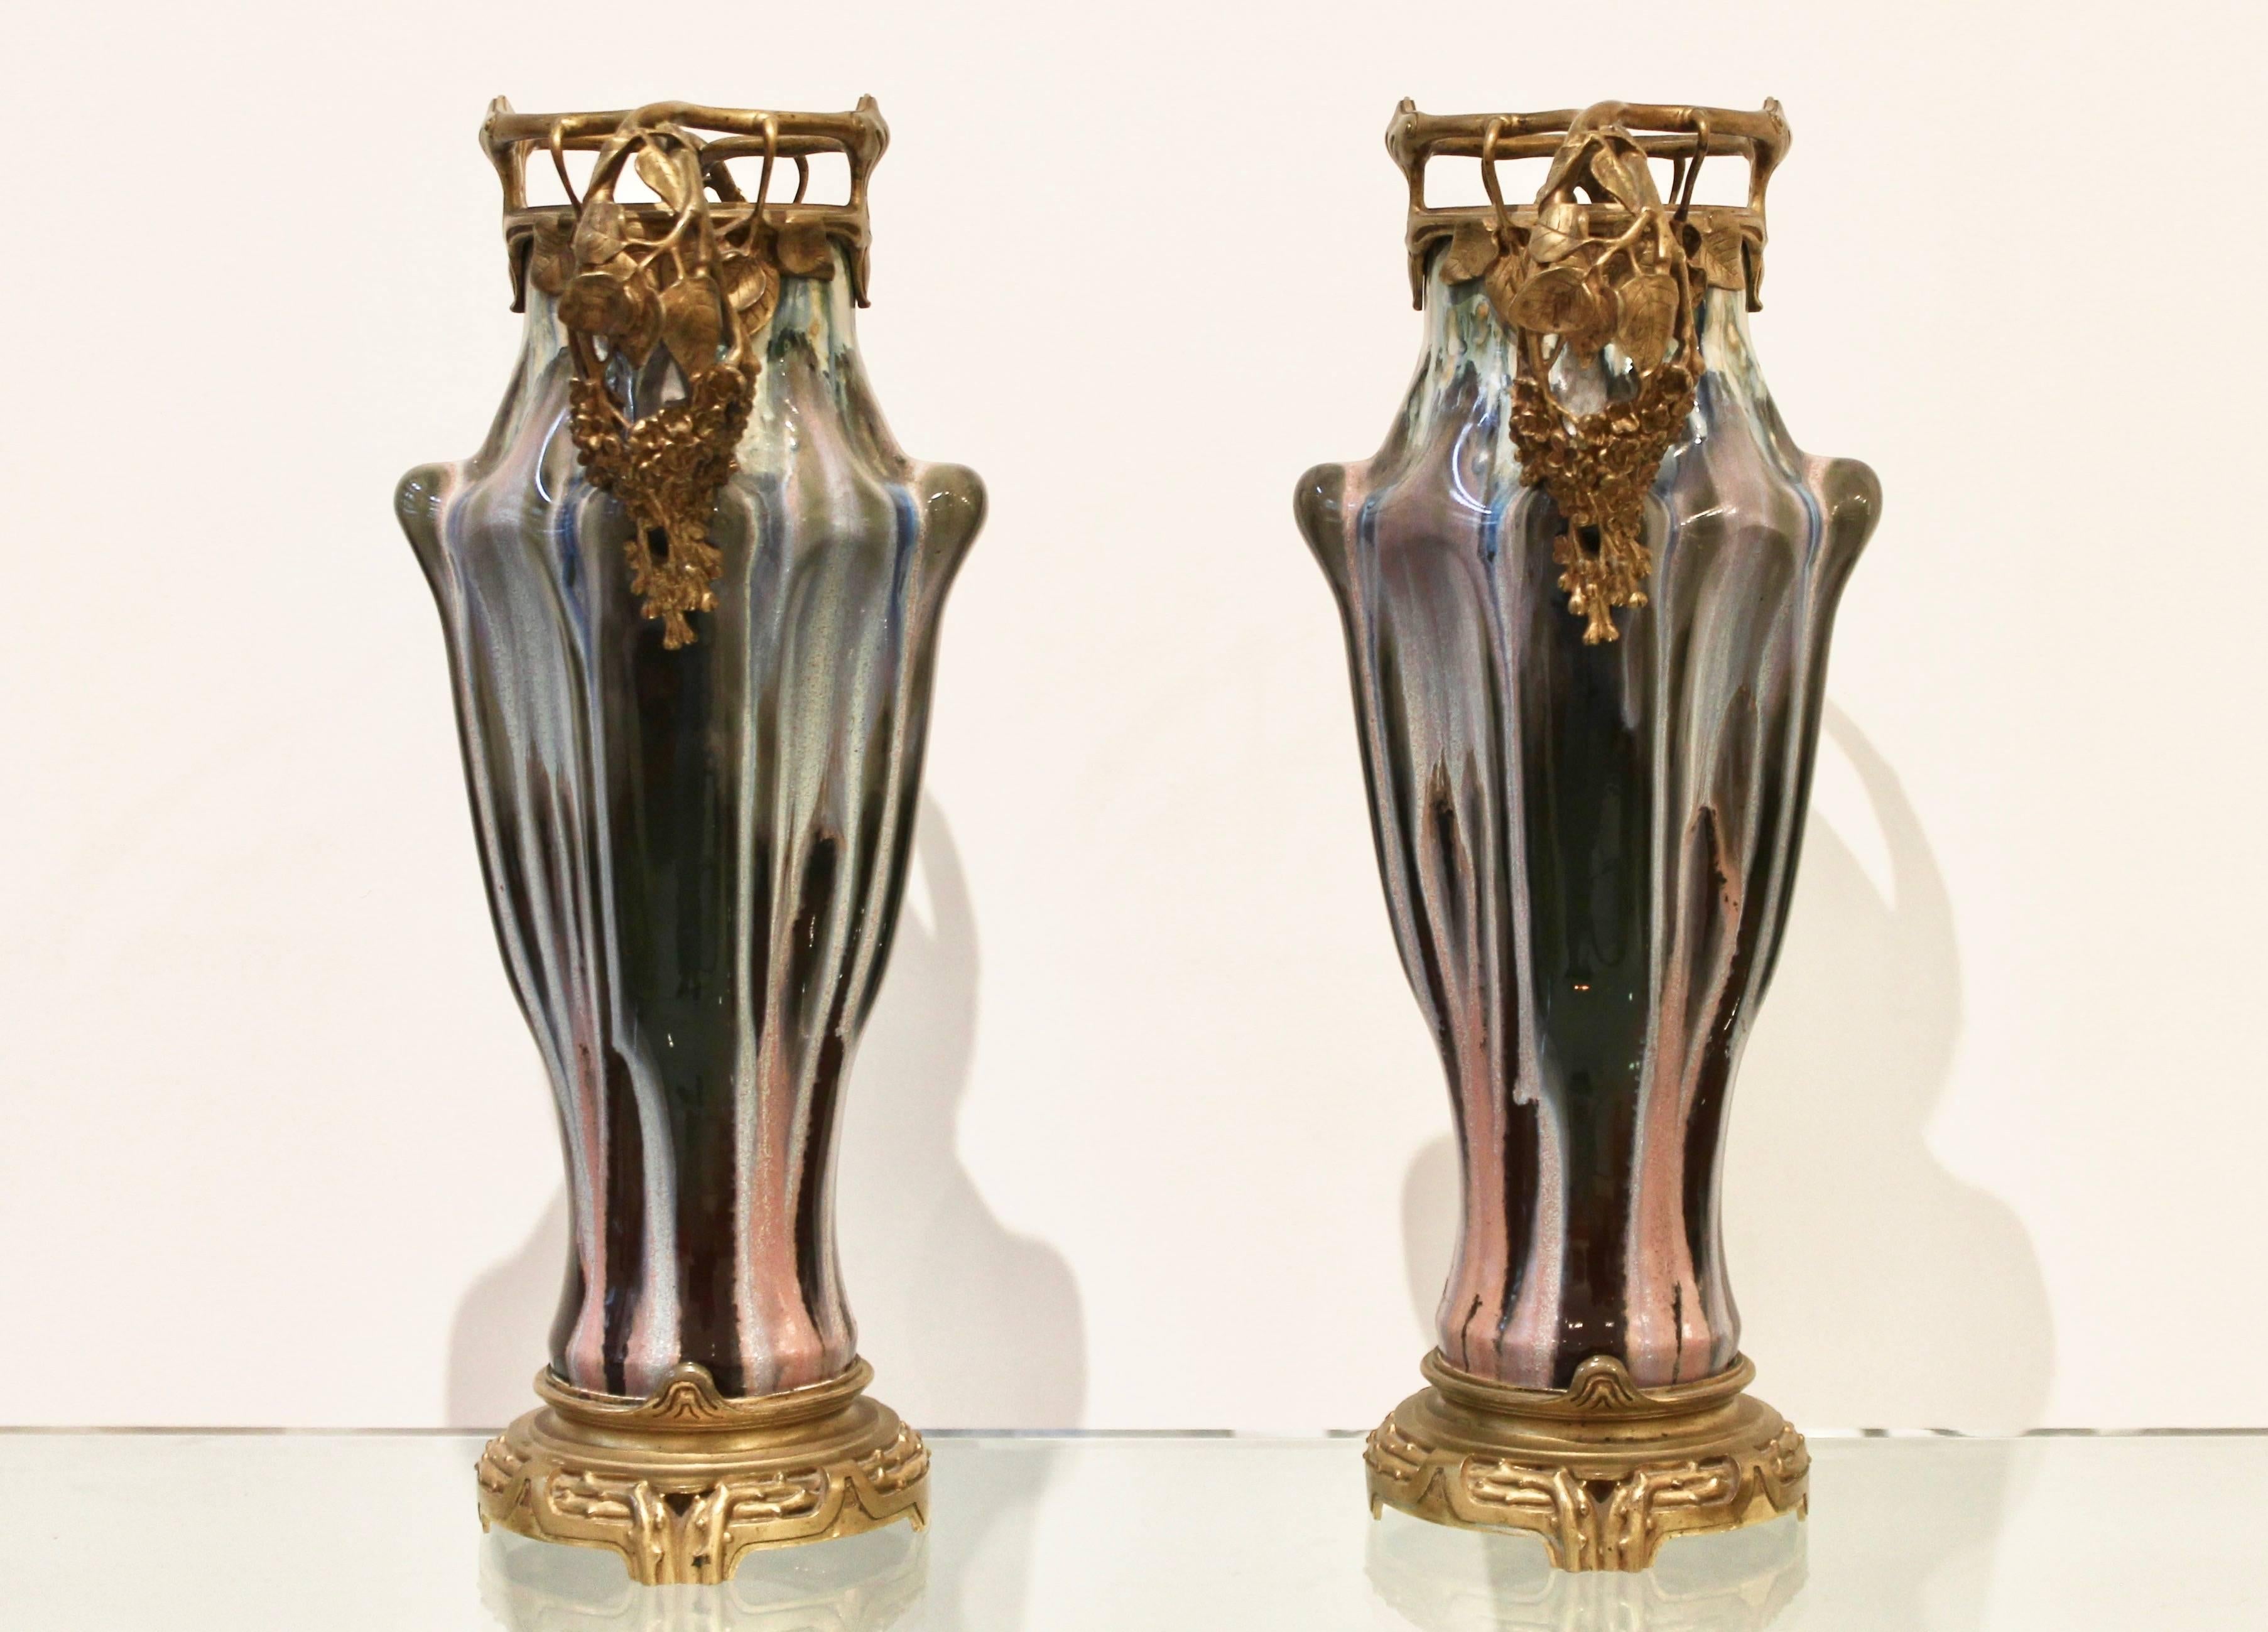 Paul Louchet (1854-1936).

Pair of earthenware Art Nouveau vases, circa 1900.
Glazed earthenware, chiseled gilt bronze.
Louchet seal on base.

Pair of vases in earthenware, decor of purple and pink streaks on brown and brick red background.